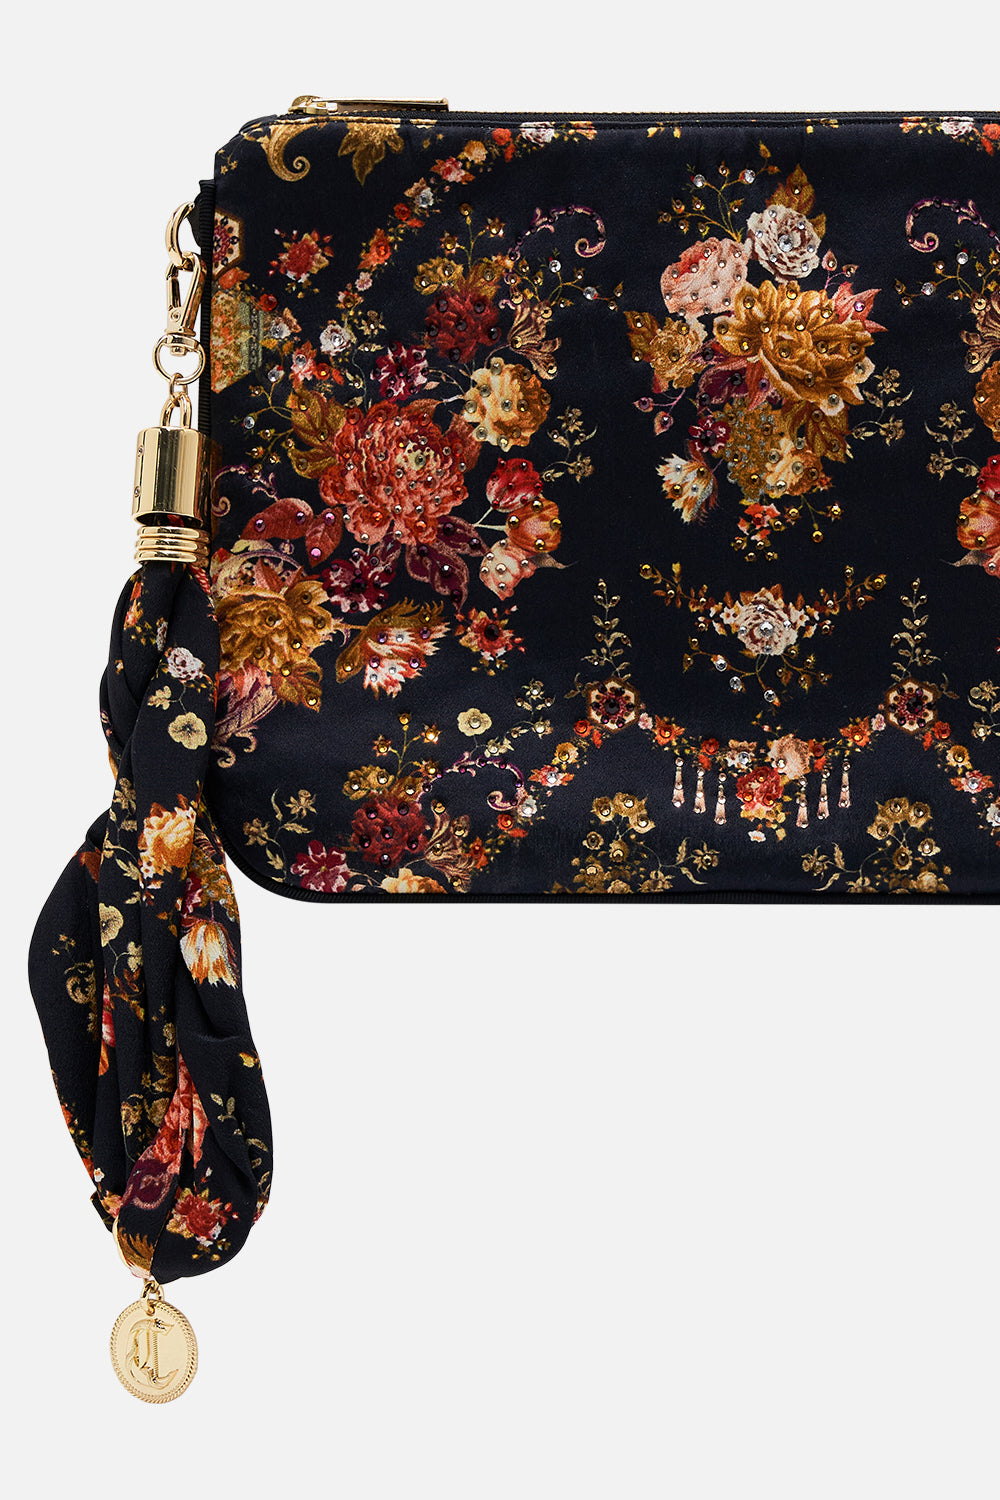 CAMILLA Floral Scarf Clutch in Stitched in Time print